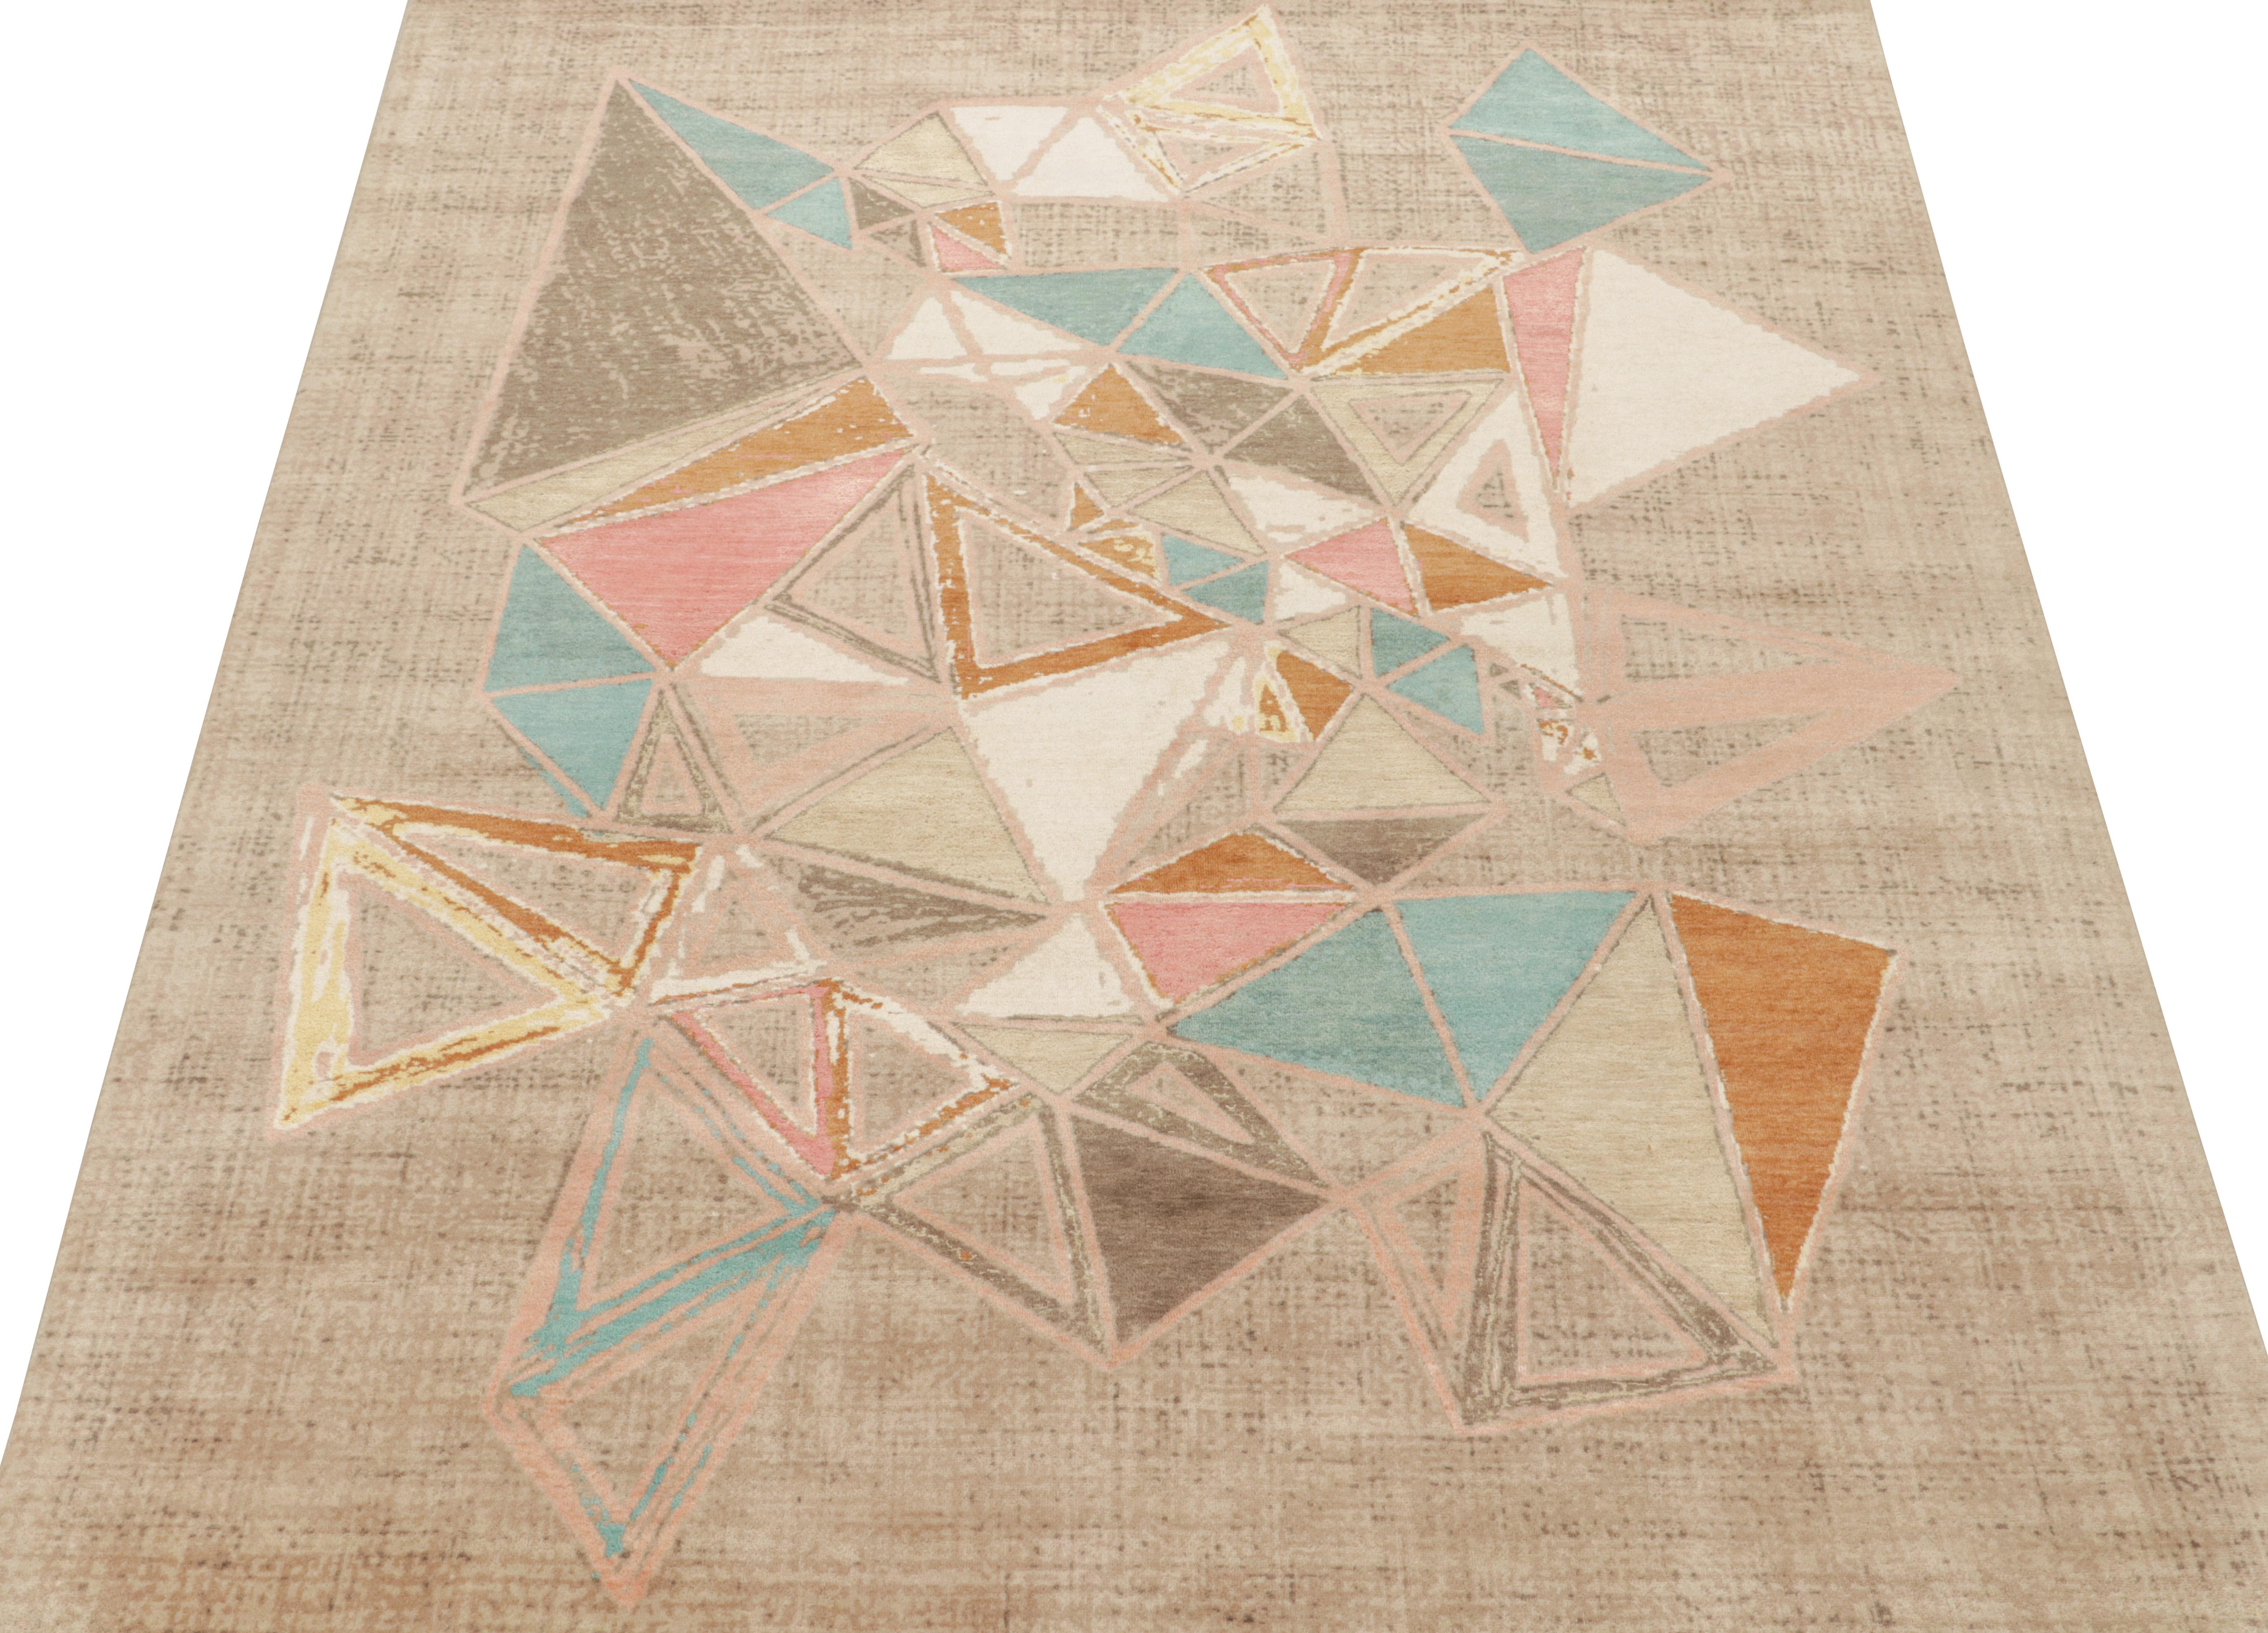 This modern 8x10 rug is an exciting new addition to the Mid-Century Modern rug collection by Rug & Kilim. Hand-knotted in wool, cotton and silk, it’s a bold take on 1950s postmodern aesthetics never-before seen in this quality. 

This design draws